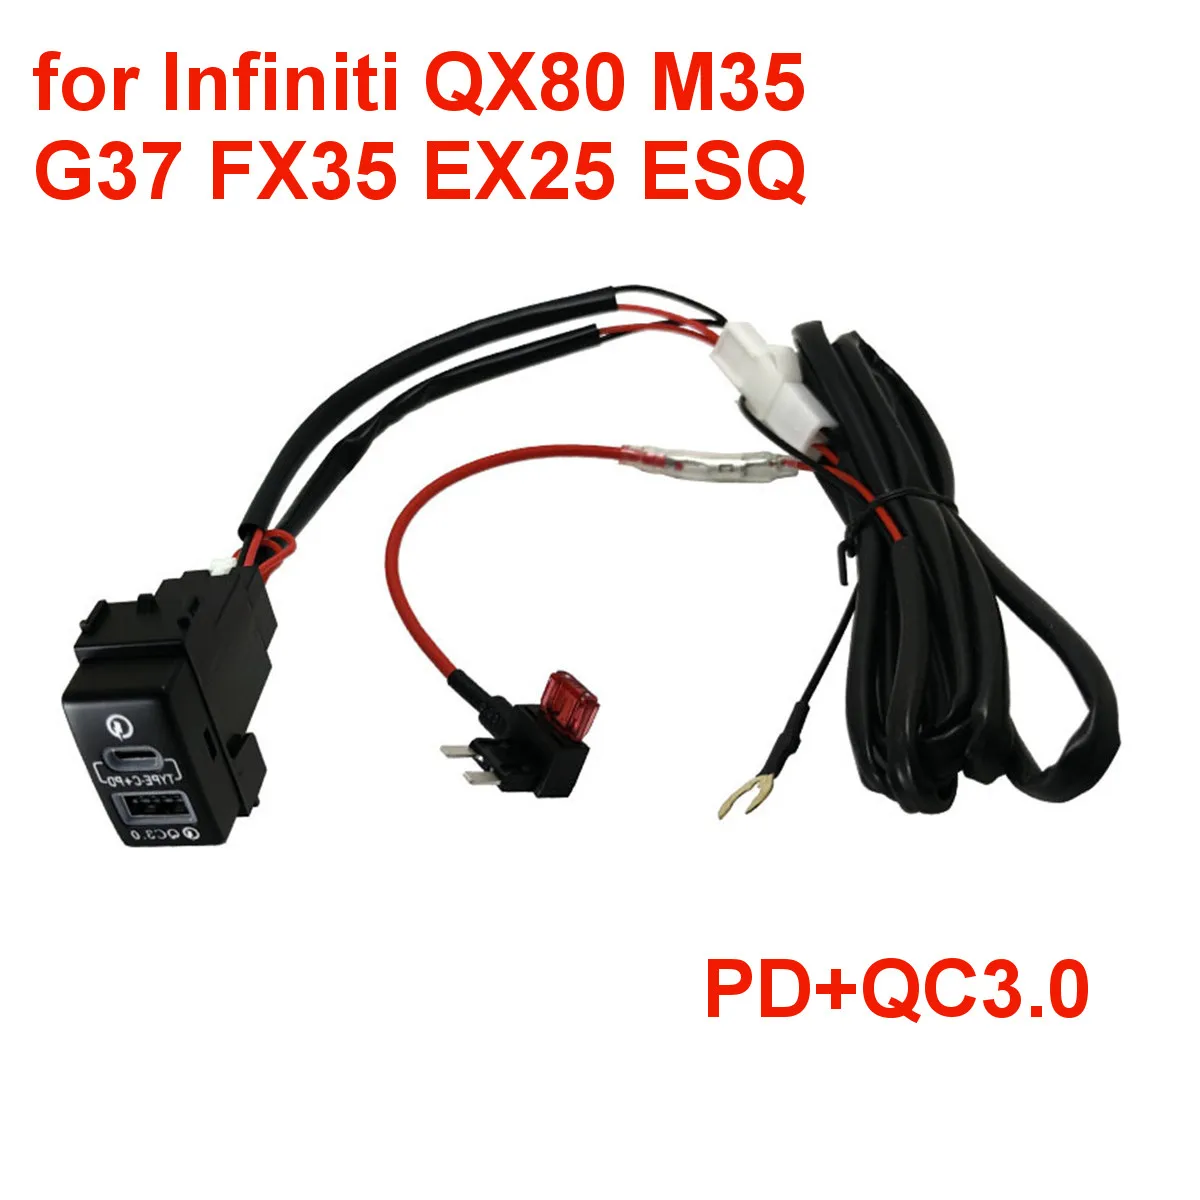 

PD QC3.0 Type-C USB Interface Socket Quick Charge Fast Car Charger for Infiniti QX80 M35 G37 FX35 EX25 ESQ